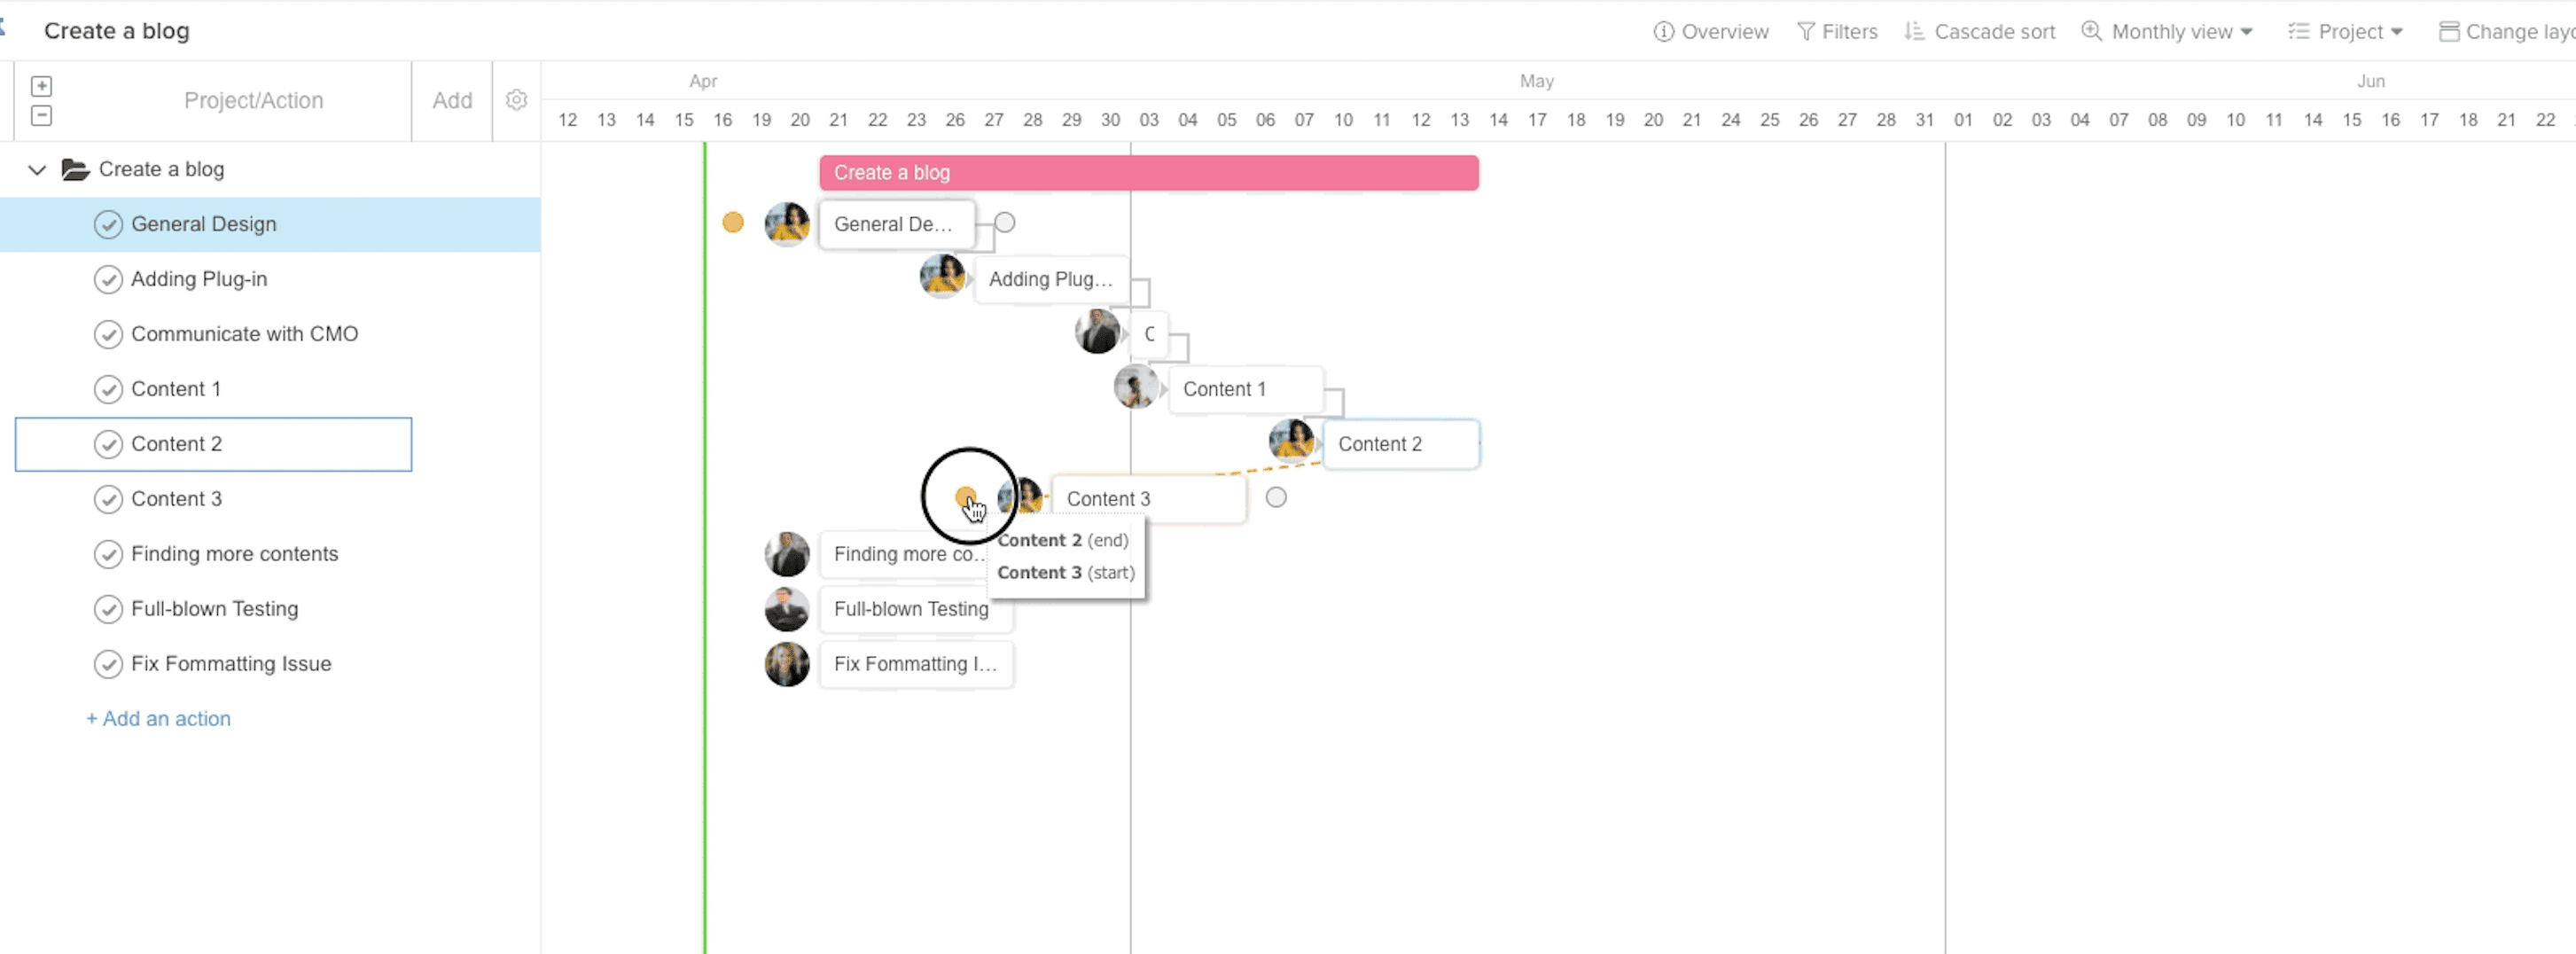 Screenshot of creating task dependencies in Hive for a project